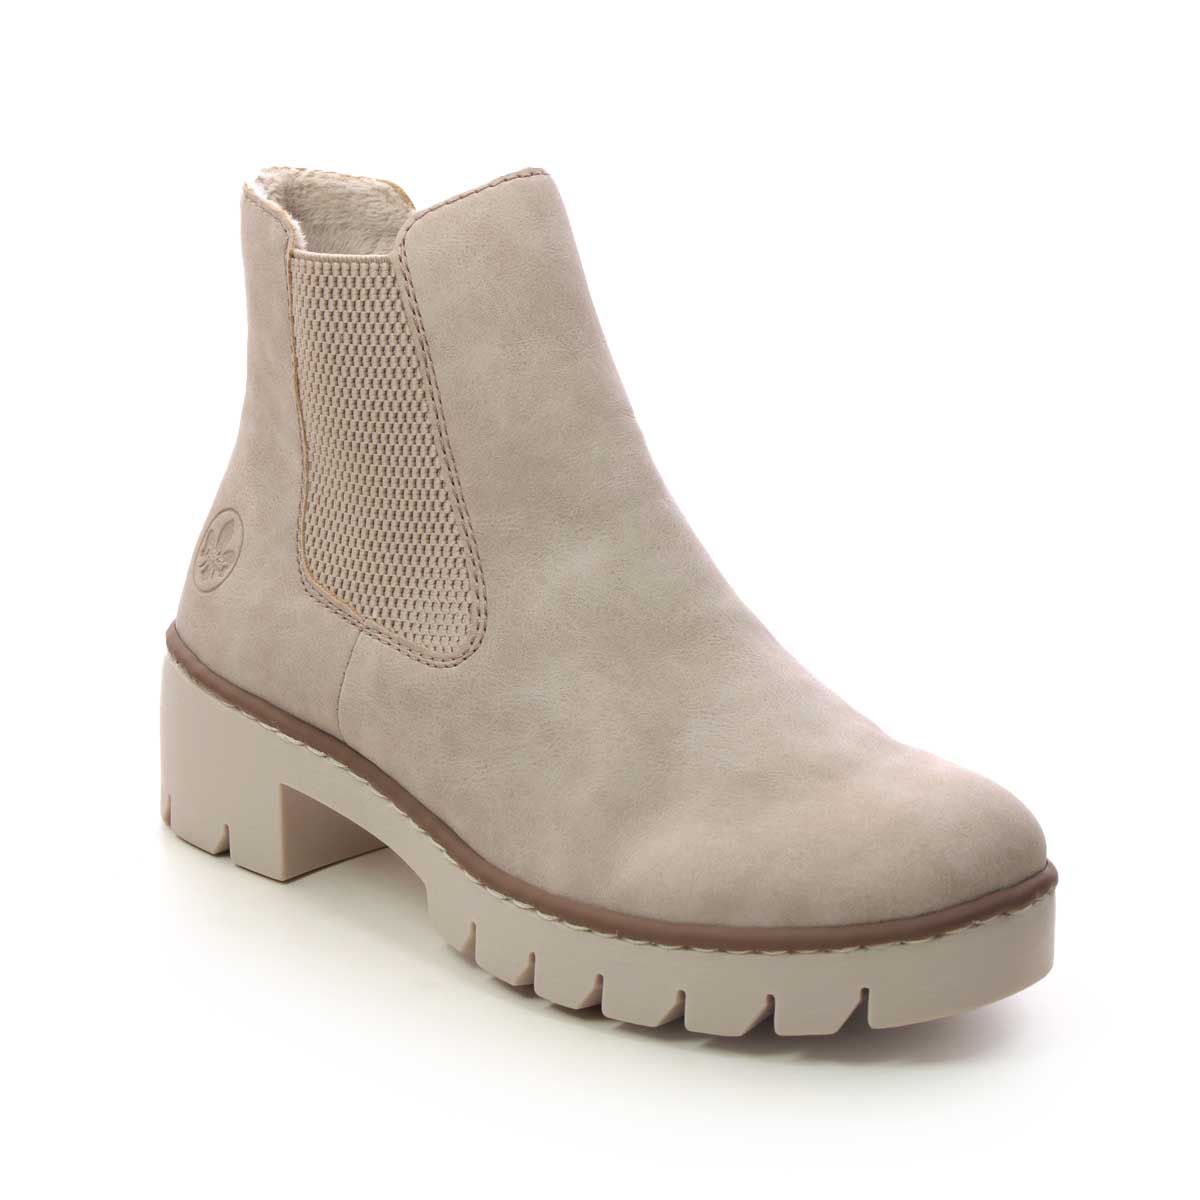 Rieker X5772-60 Light taupe Womens Chelsea Boots in a Plain Man-made in Size 41